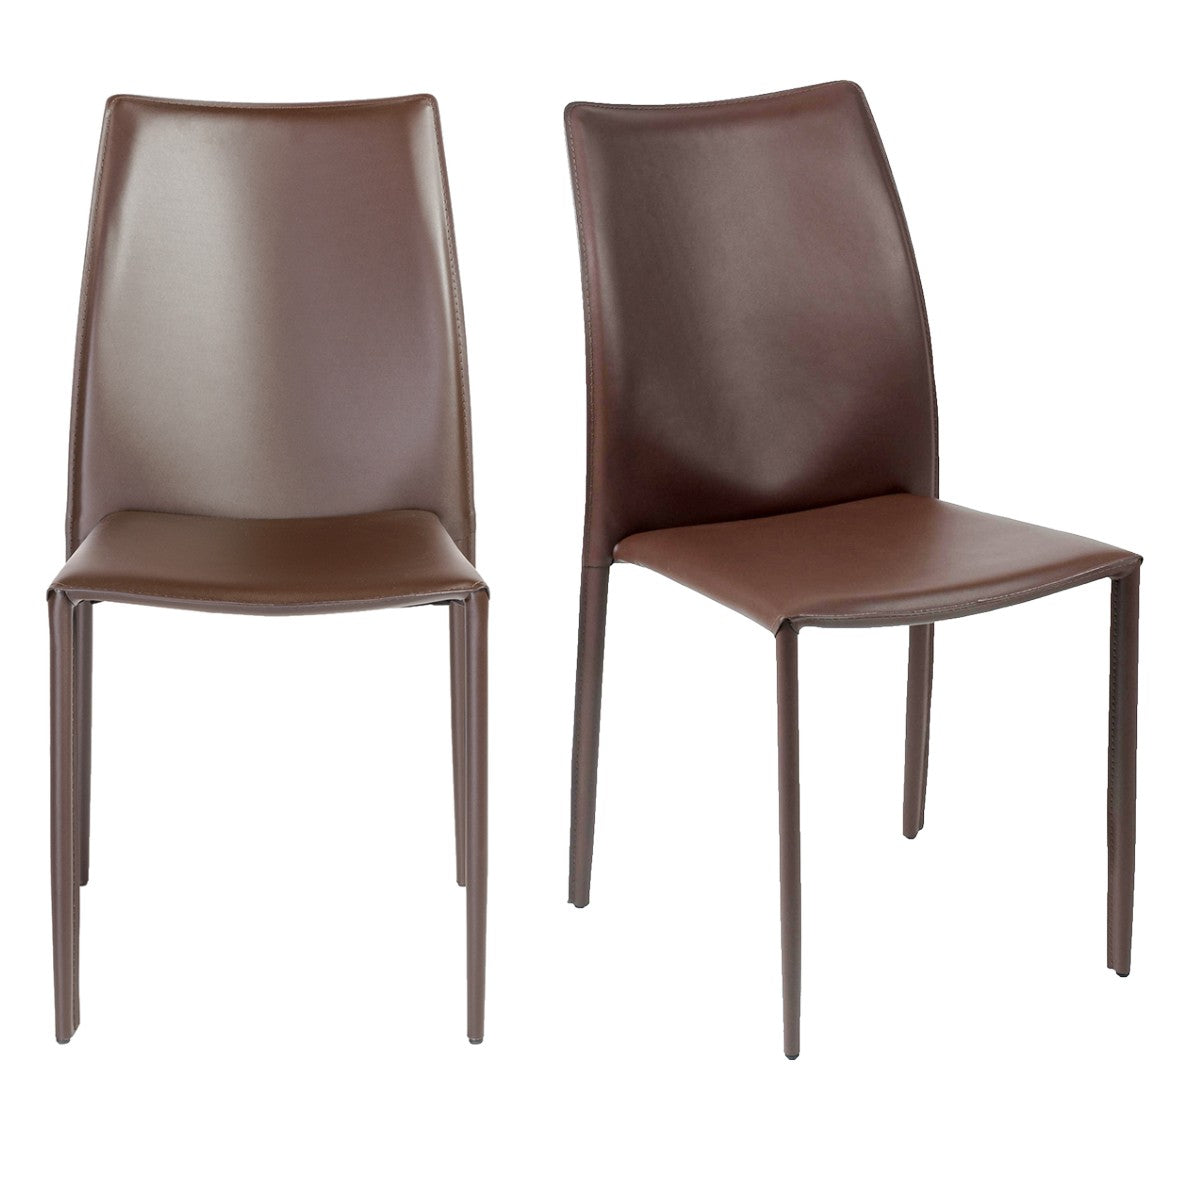 Set of Two All Dark Brown Stacking Chairs